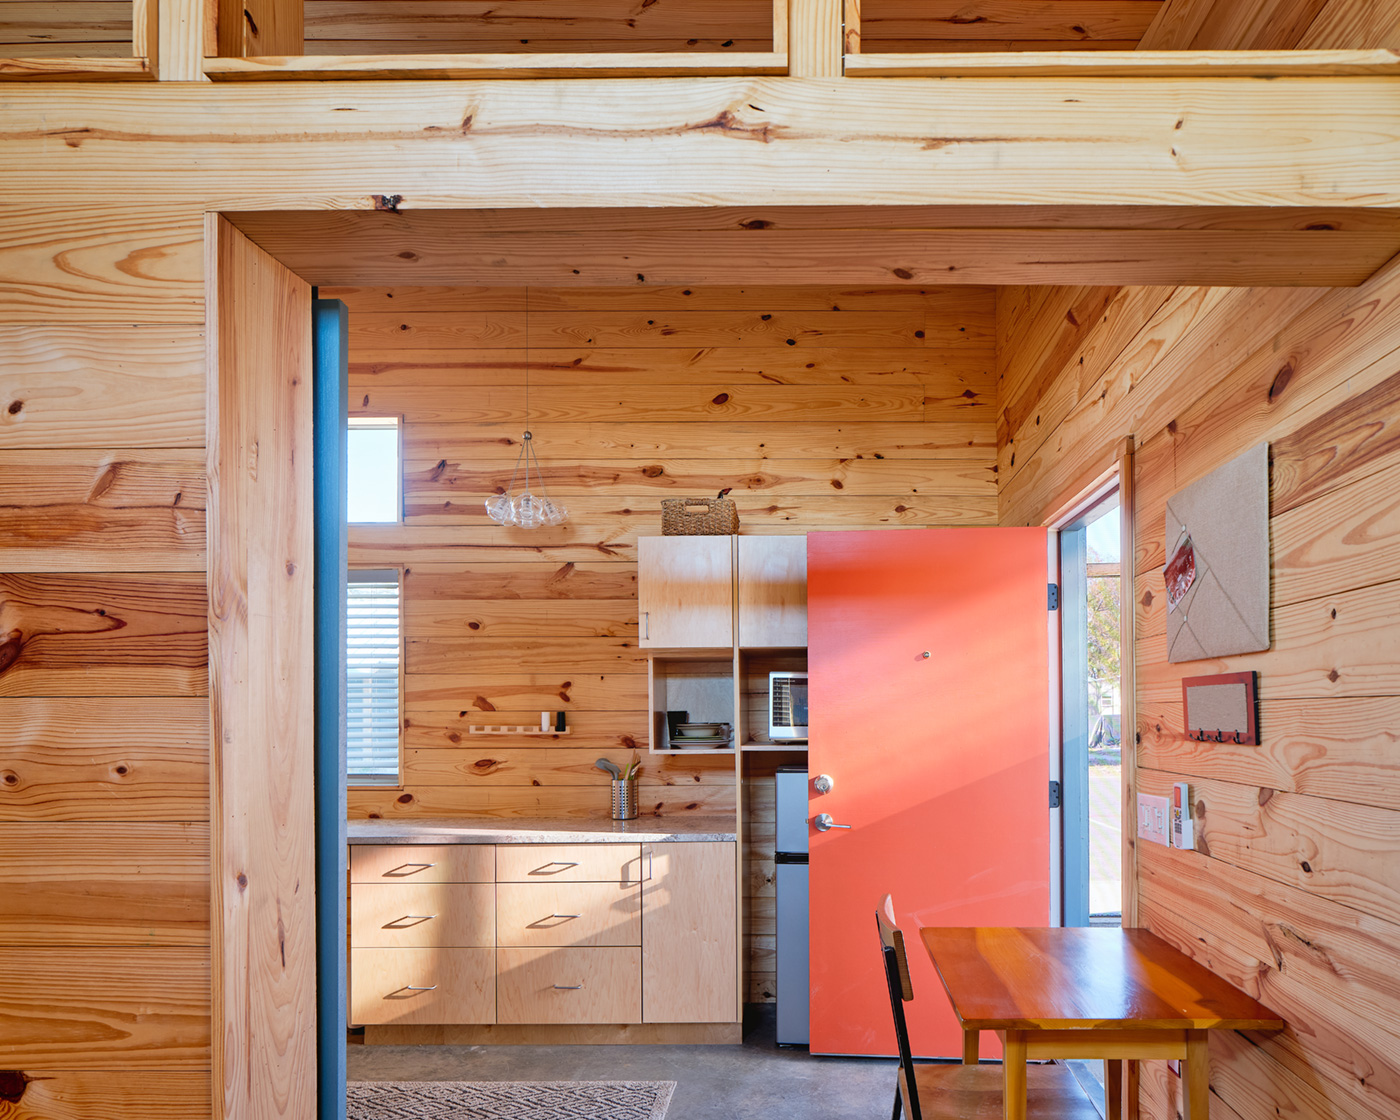 The front door and wooden kitchen of a tiny home.